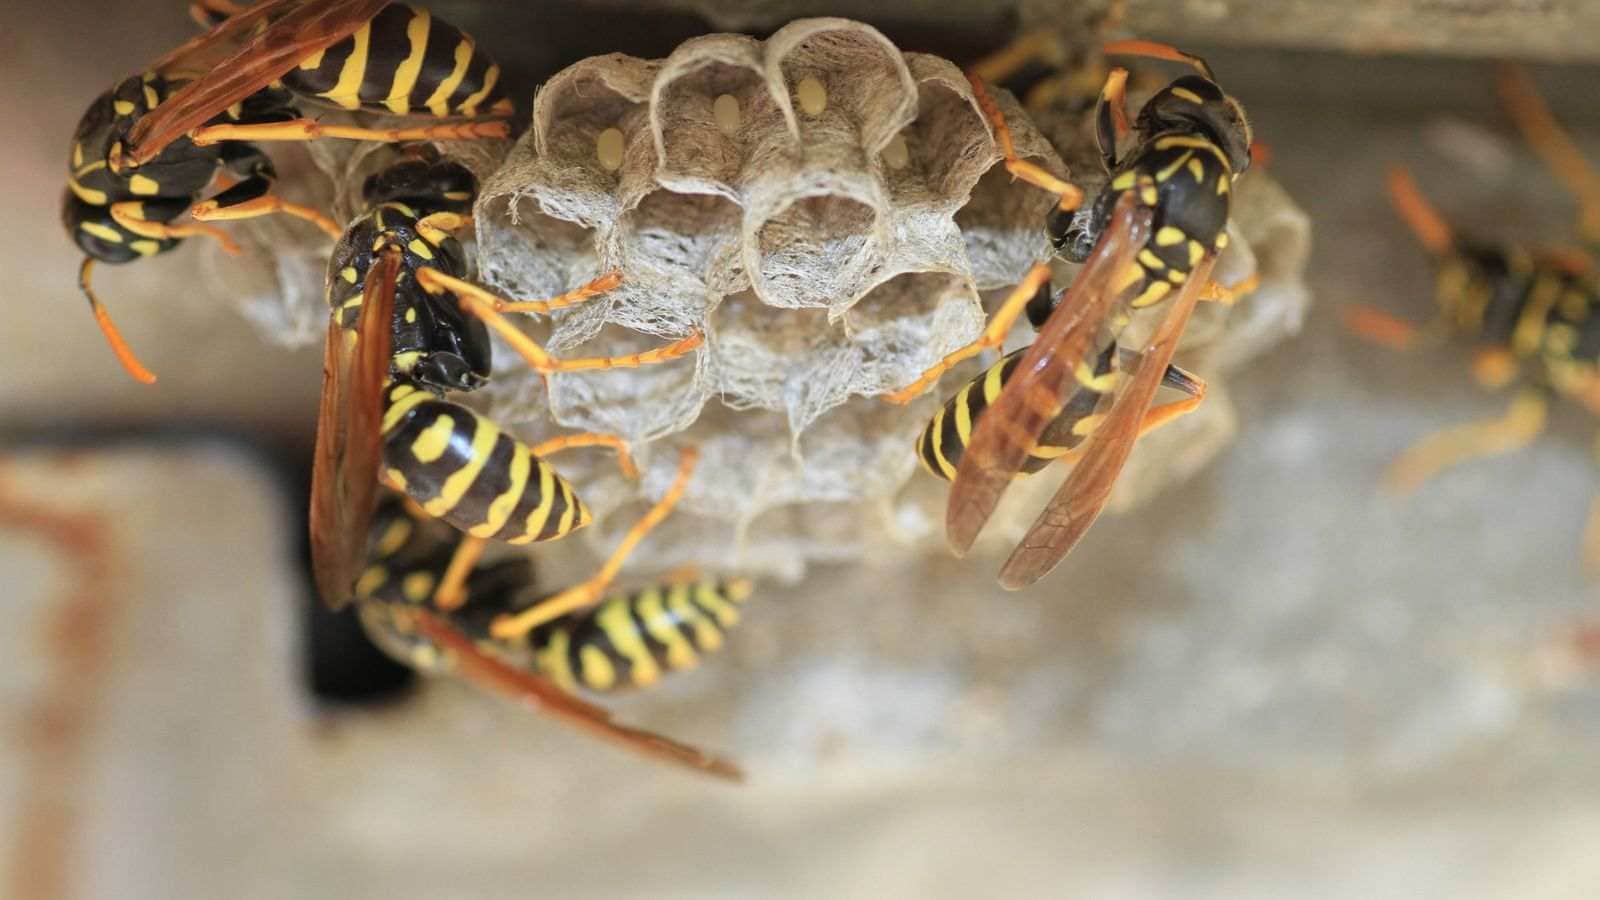 How to Get Rid of Wasps Effectively and Prevent Future Nests